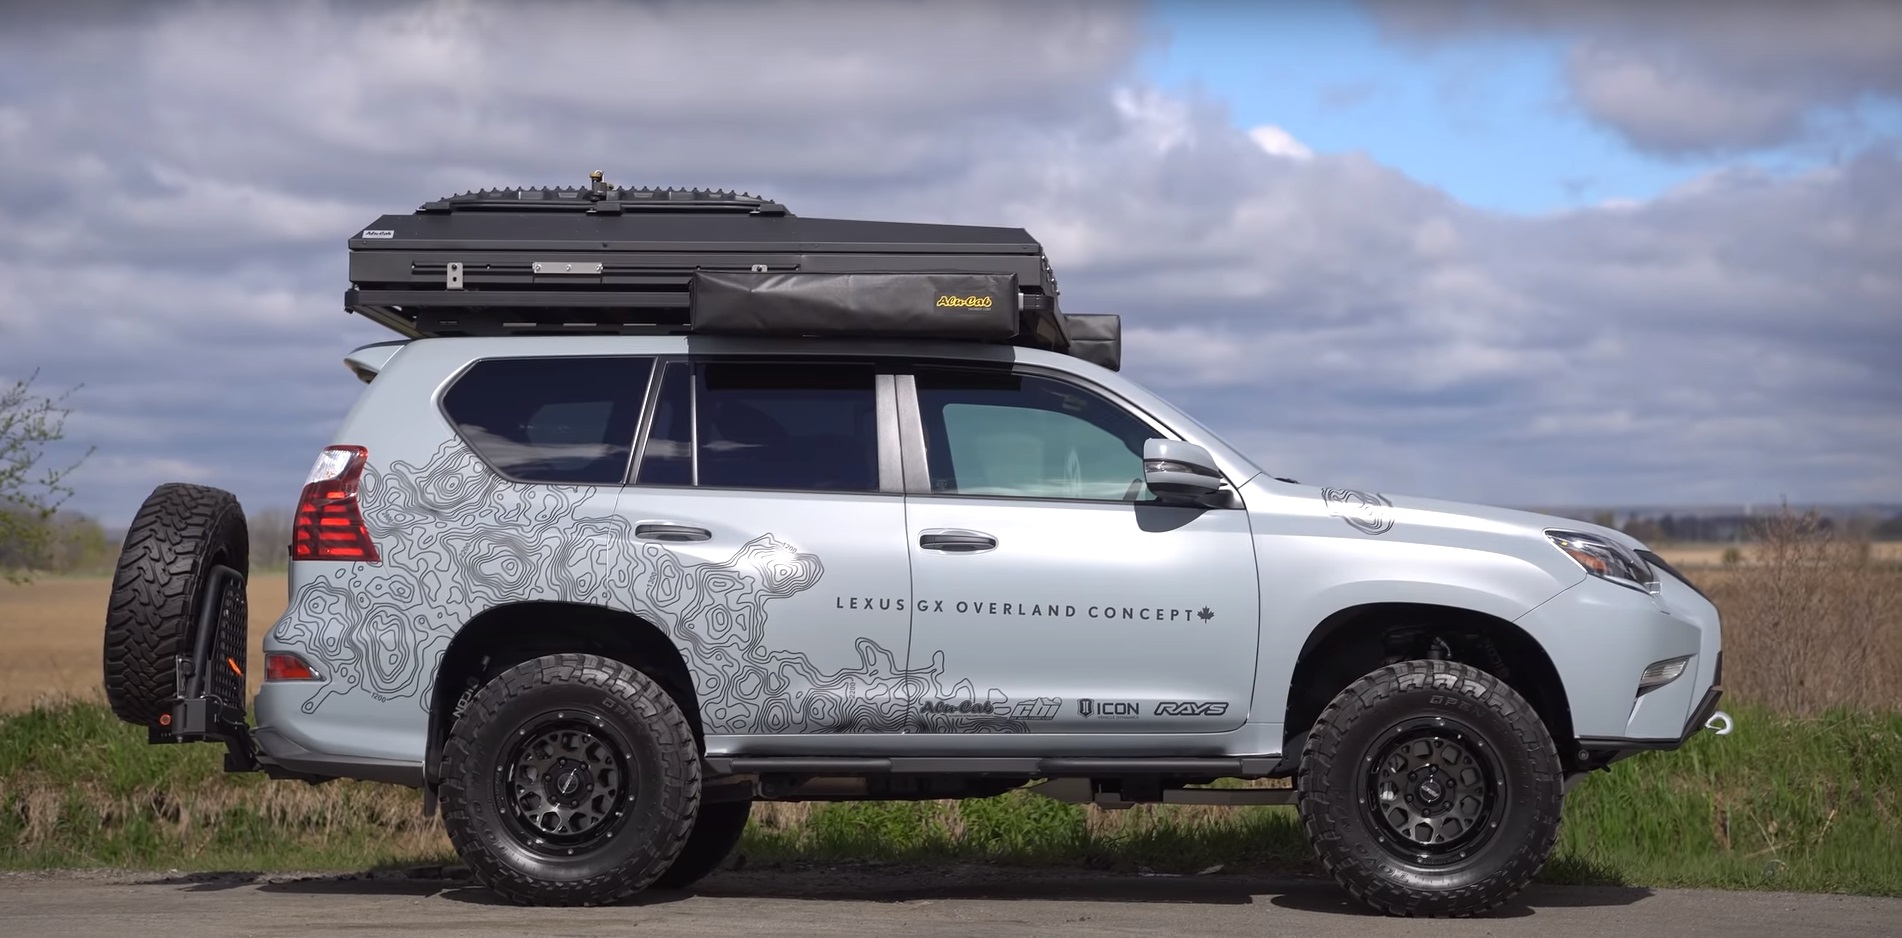 Lexus GX 460 Overland Concept Is a Luxury Off-Road-Ready RV - autoevolution